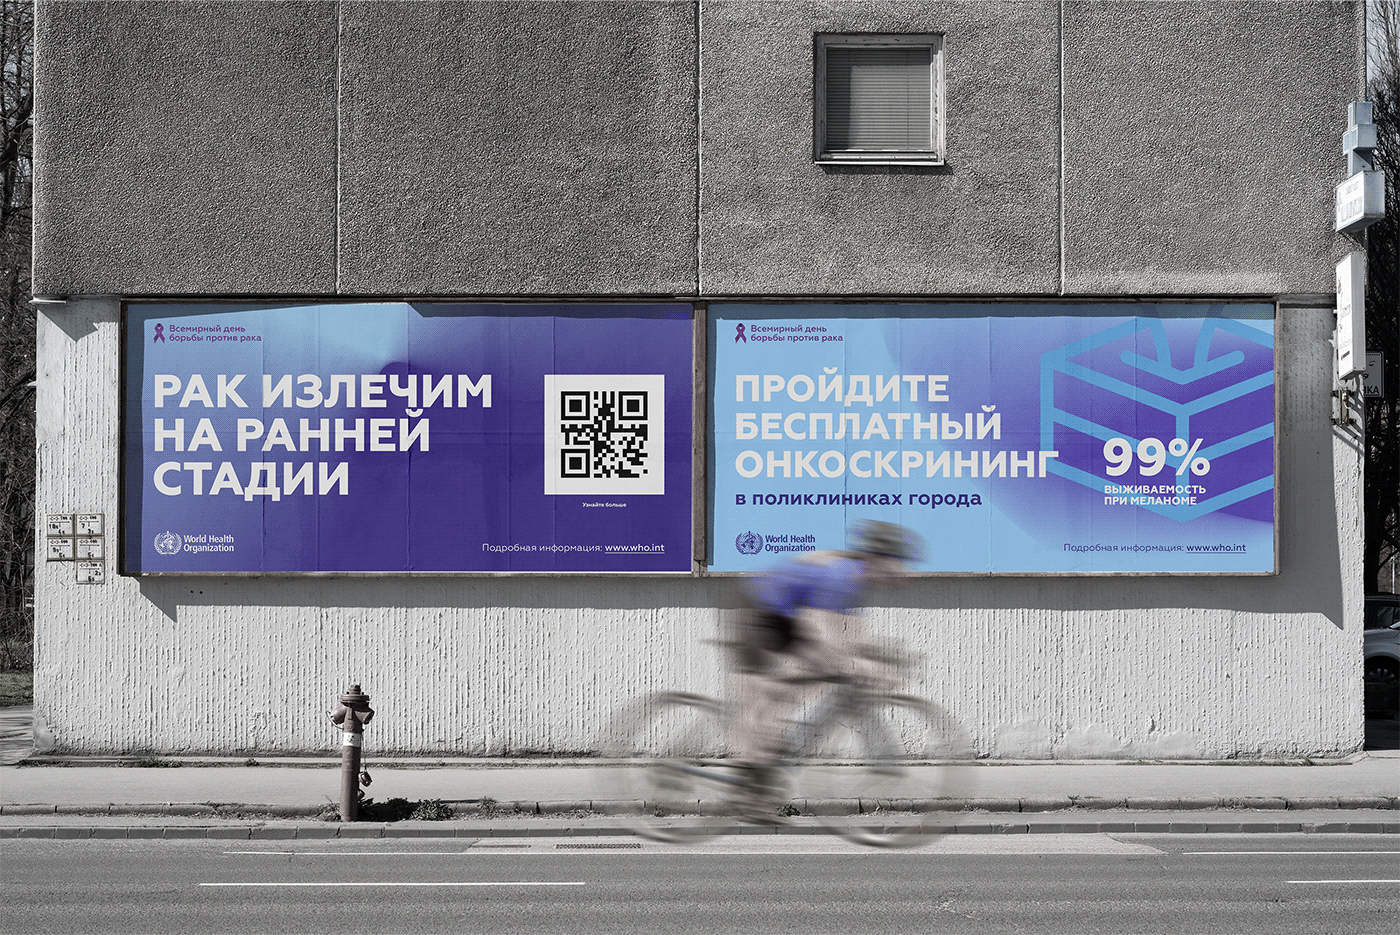 Keyvisual visual identity Advertising  Advertising Campaign Outdoor billboard poster medicine cancer Who